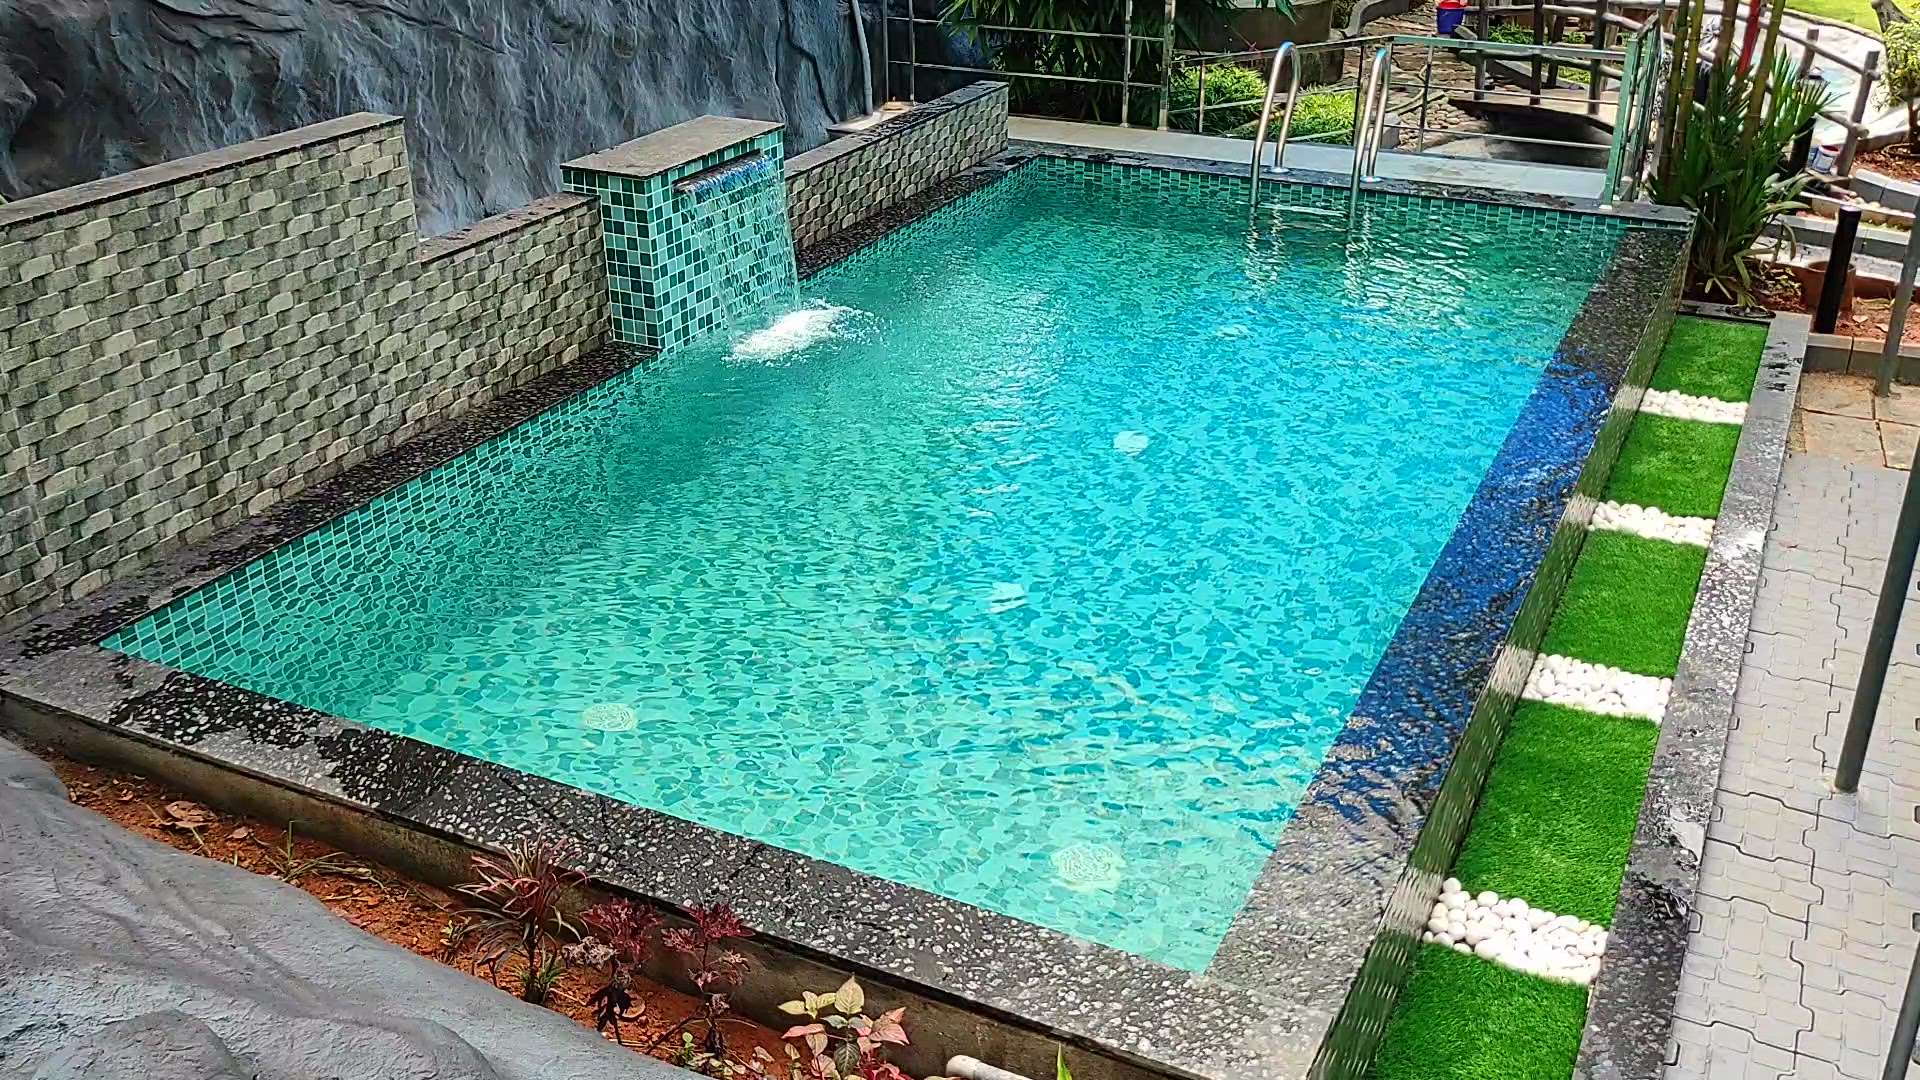 Looking for Swimming Pool Contractor or pool products ?
Contact : +91 8137883338 | +91 9946676094
#swimmingpools #swimmingpoolcontractor  #swimmingpoolbuilders #swimmingpoolwork #swimmingpoolsolutions  #swimmingpoolconsultants #swimmingpooldesign #swimmingpoolconstruction 
#swimmingpoolmaintenance #poolconstruction #poolbuilder #pooltiles #poolchemicals #poolfiltration#poolproducts#poollights #poolamc